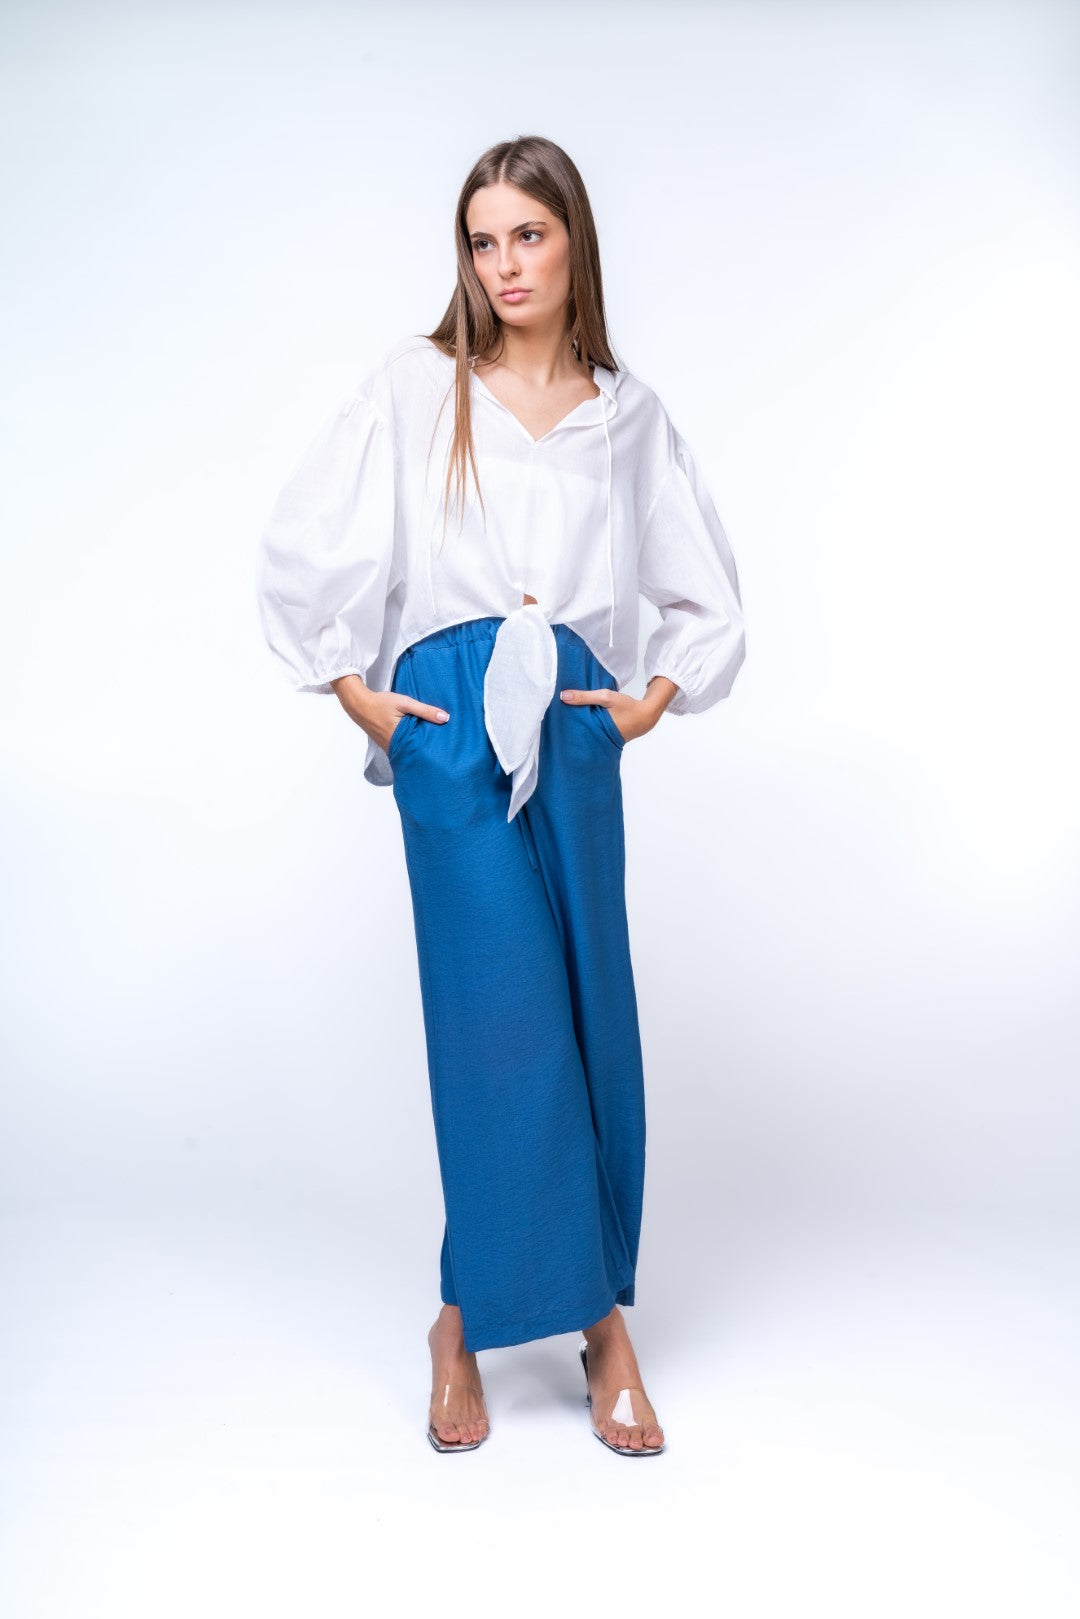 Linen Shirt With Voluminous Sleeves and Frontal Tie